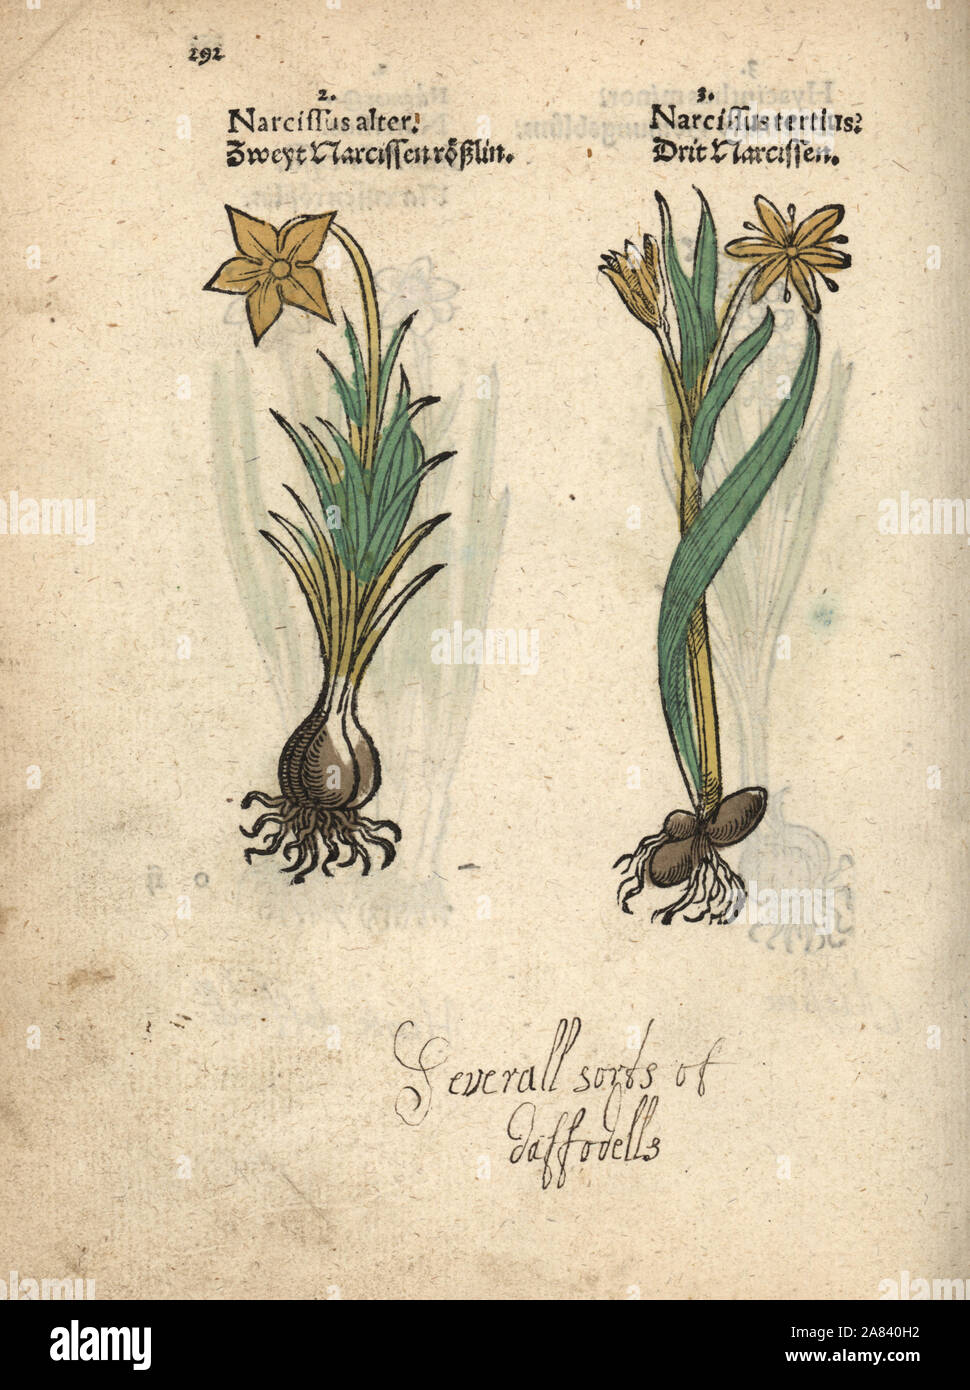 Daffodil varieties, Narcissus poeticus. Handcoloured woodblock engraving of a botanical illustration from Adam Lonicer's Krauterbuch, or Herbal, Frankfurt, 1557. This from a 17th century pirate edition or atlas of illustrations only, with captions in Latin, Greek, French, Italian, German, and in English manuscript. Stock Photo